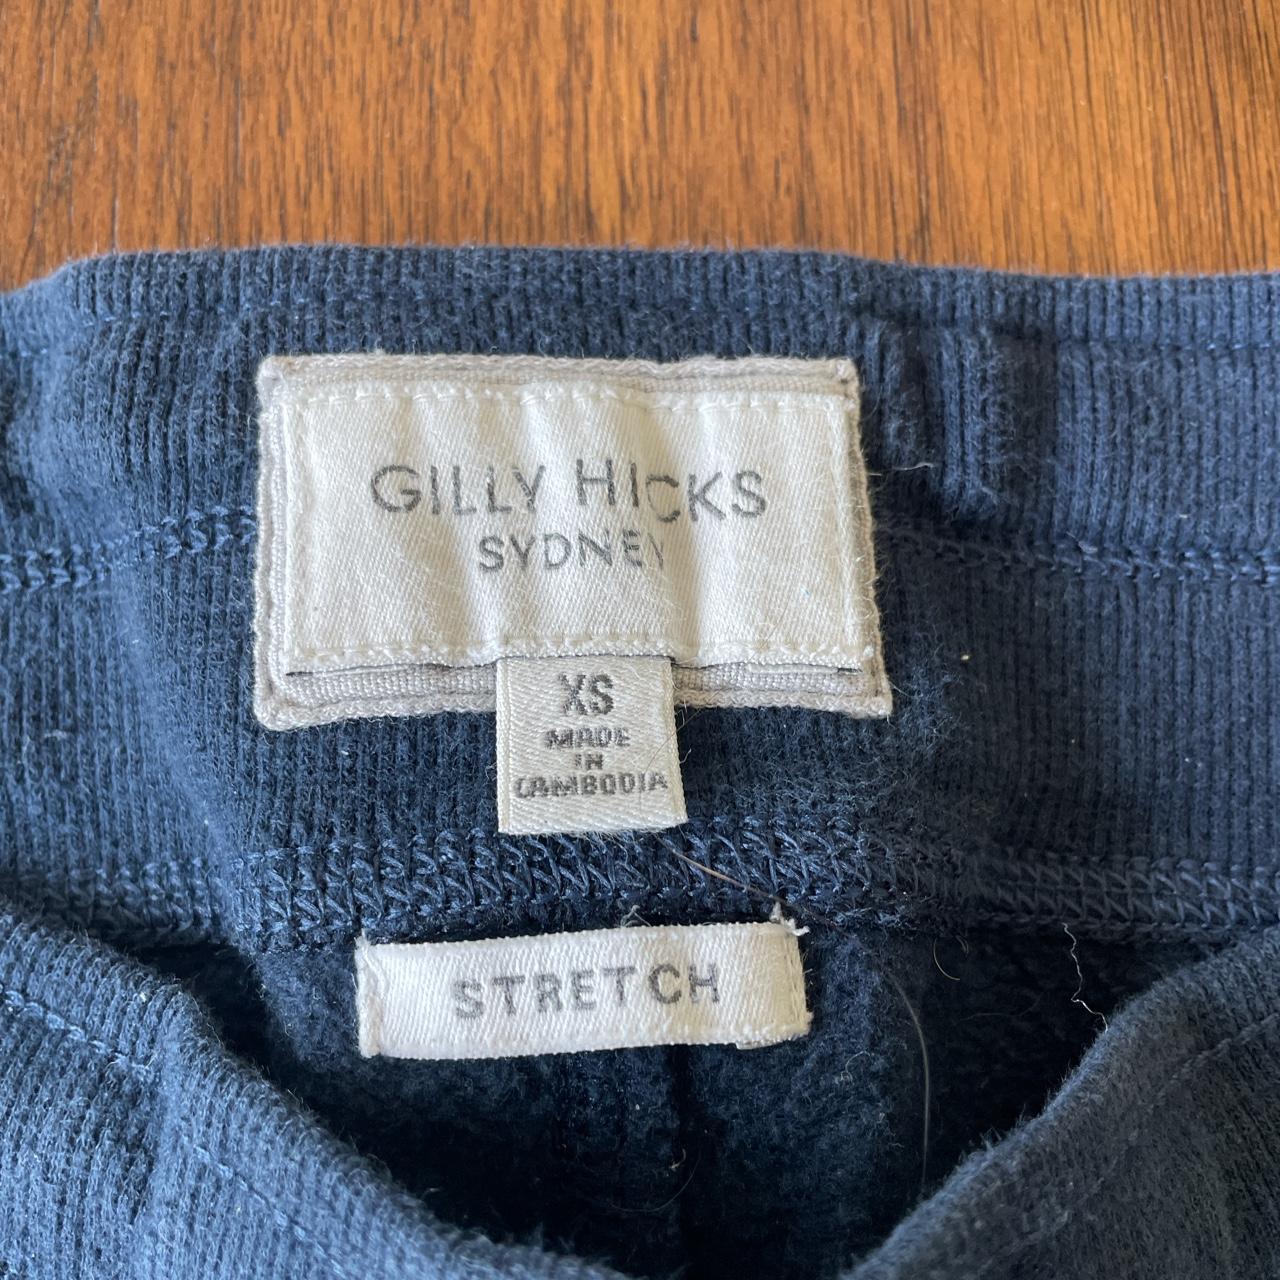 Gilly Hicks yoga pants. Sixe XS. Color blue with... - Depop